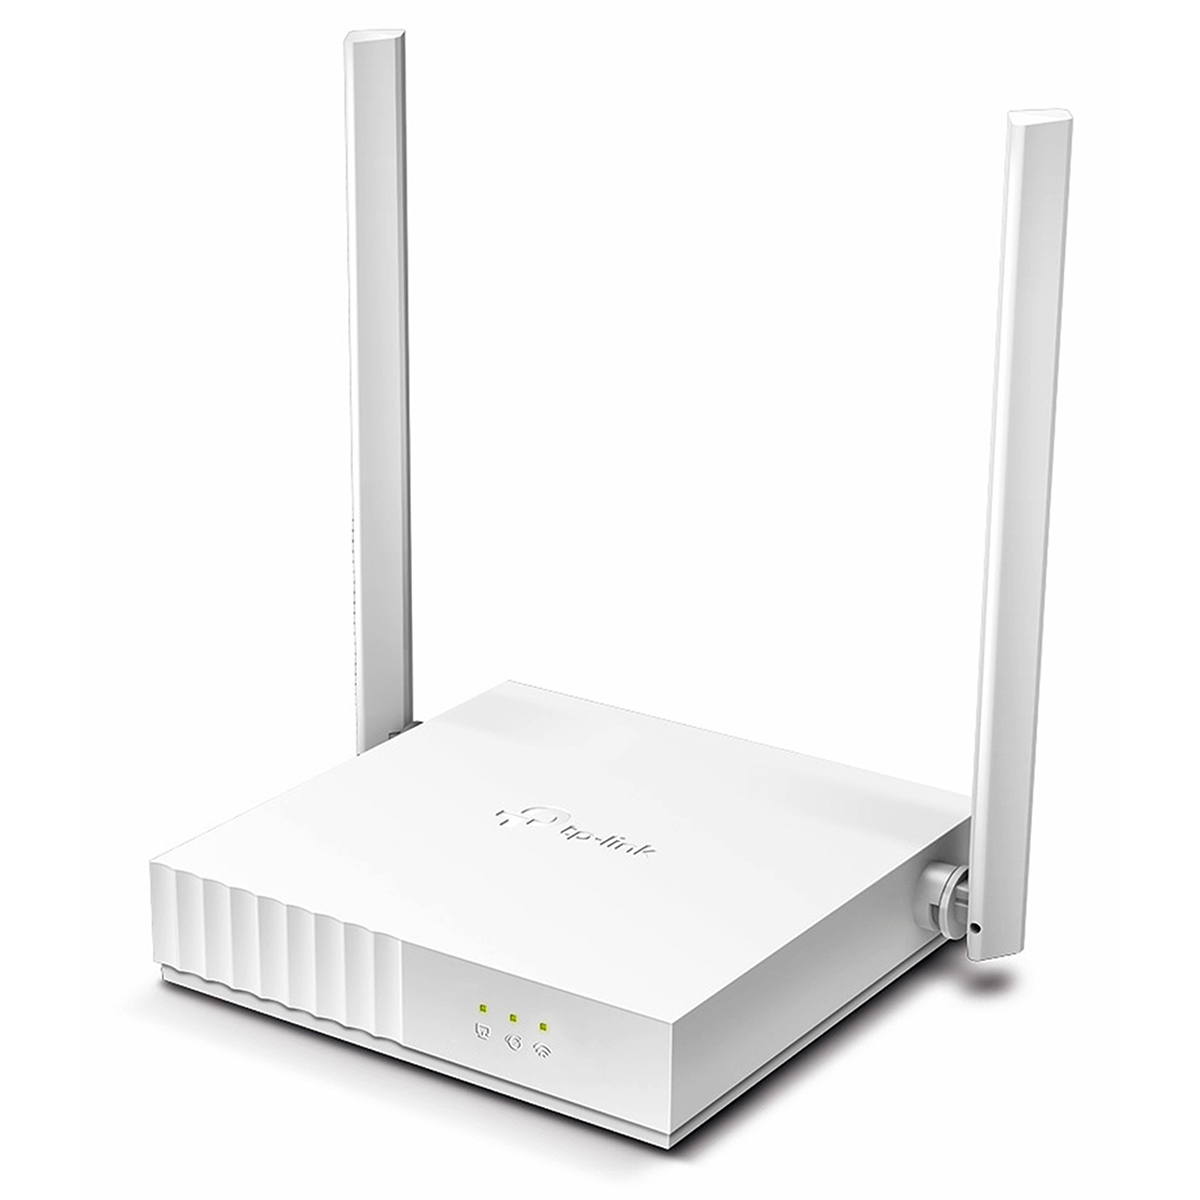 Roteador Wireless Multimodo 300 Mbps TP-Link TL-WR829N